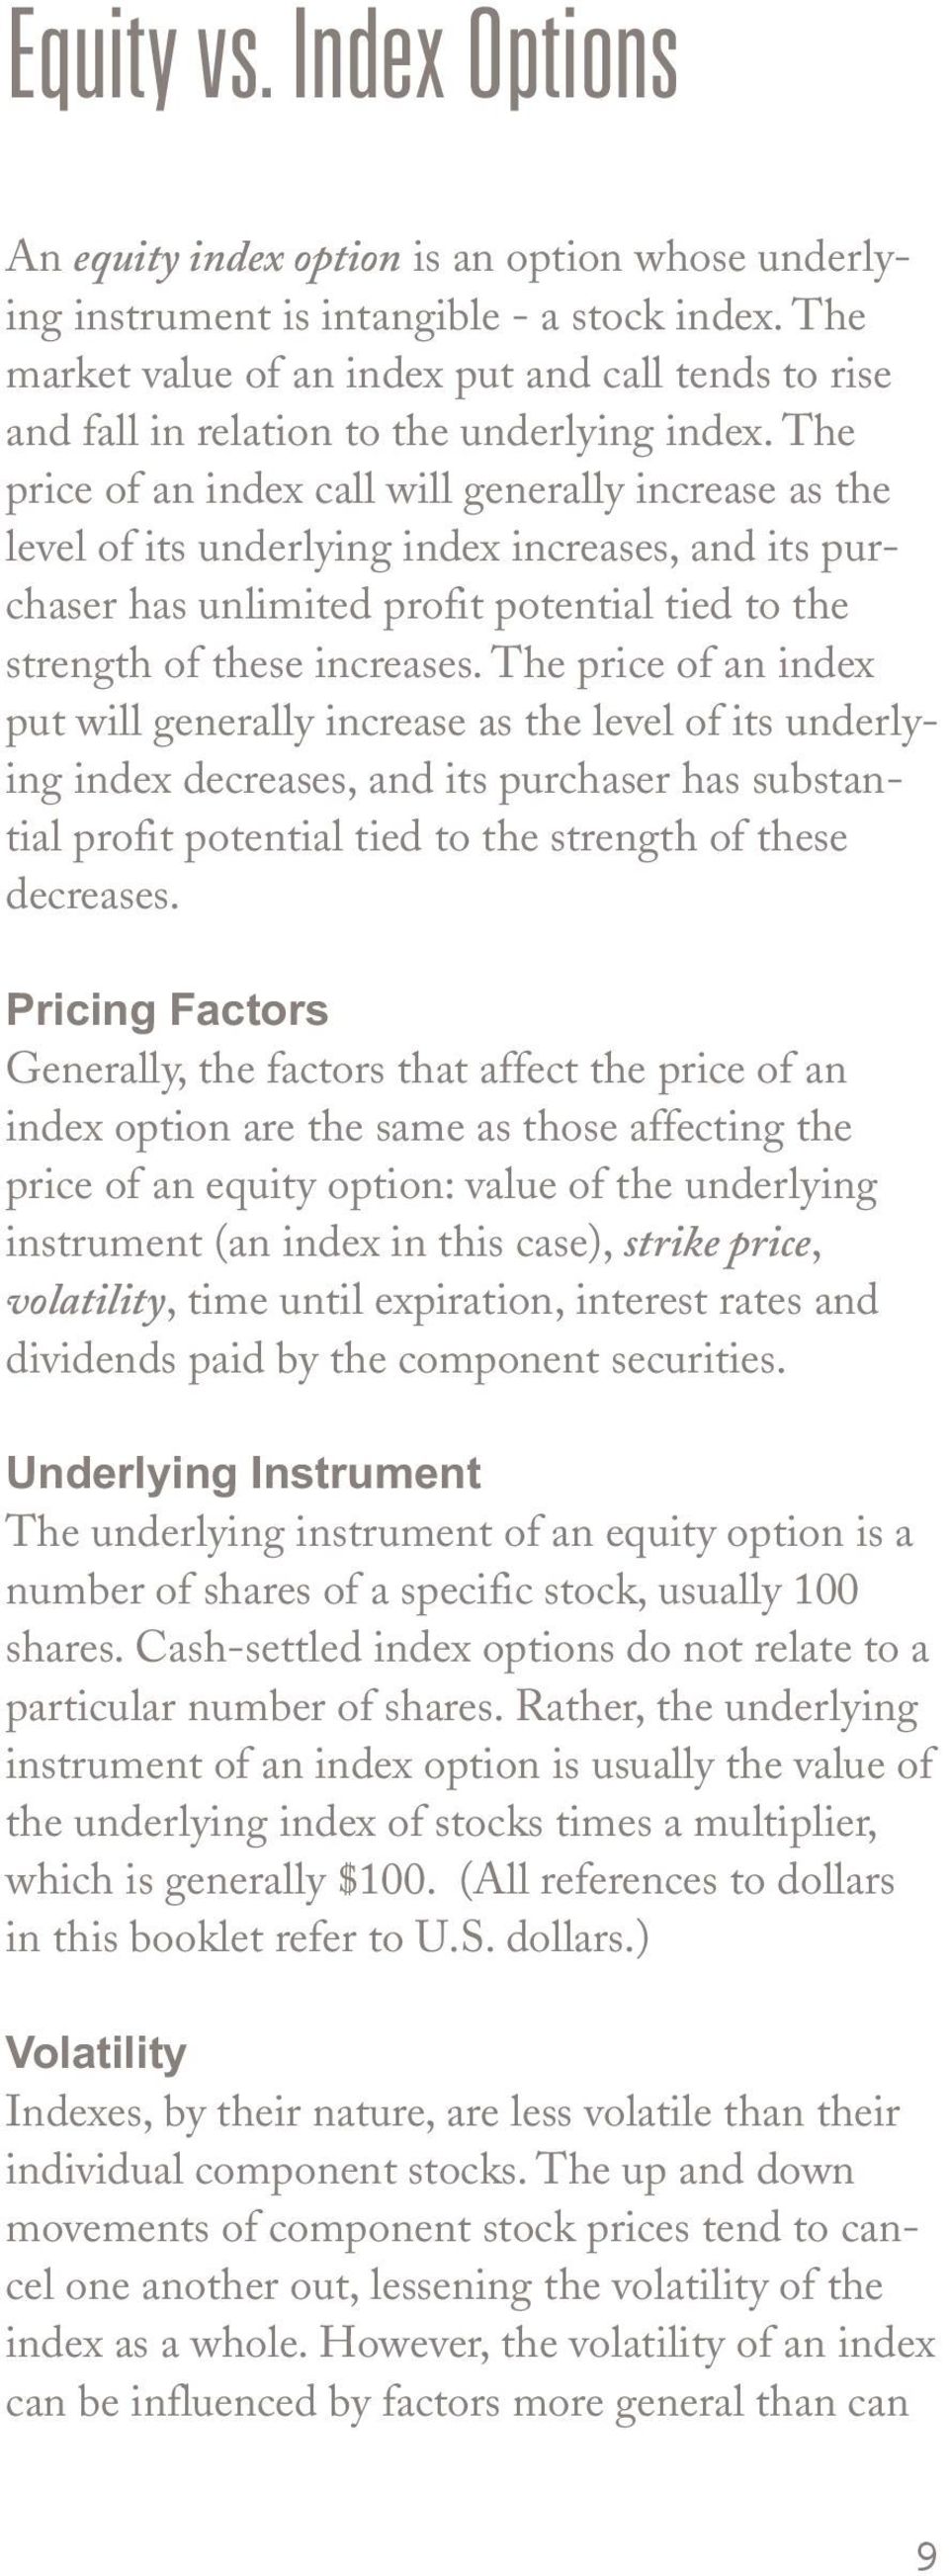 The price of an index call will generally increase as the level of its underlying index increases, and its purchaser has unlimited profit potential tied to the strength of these increases.